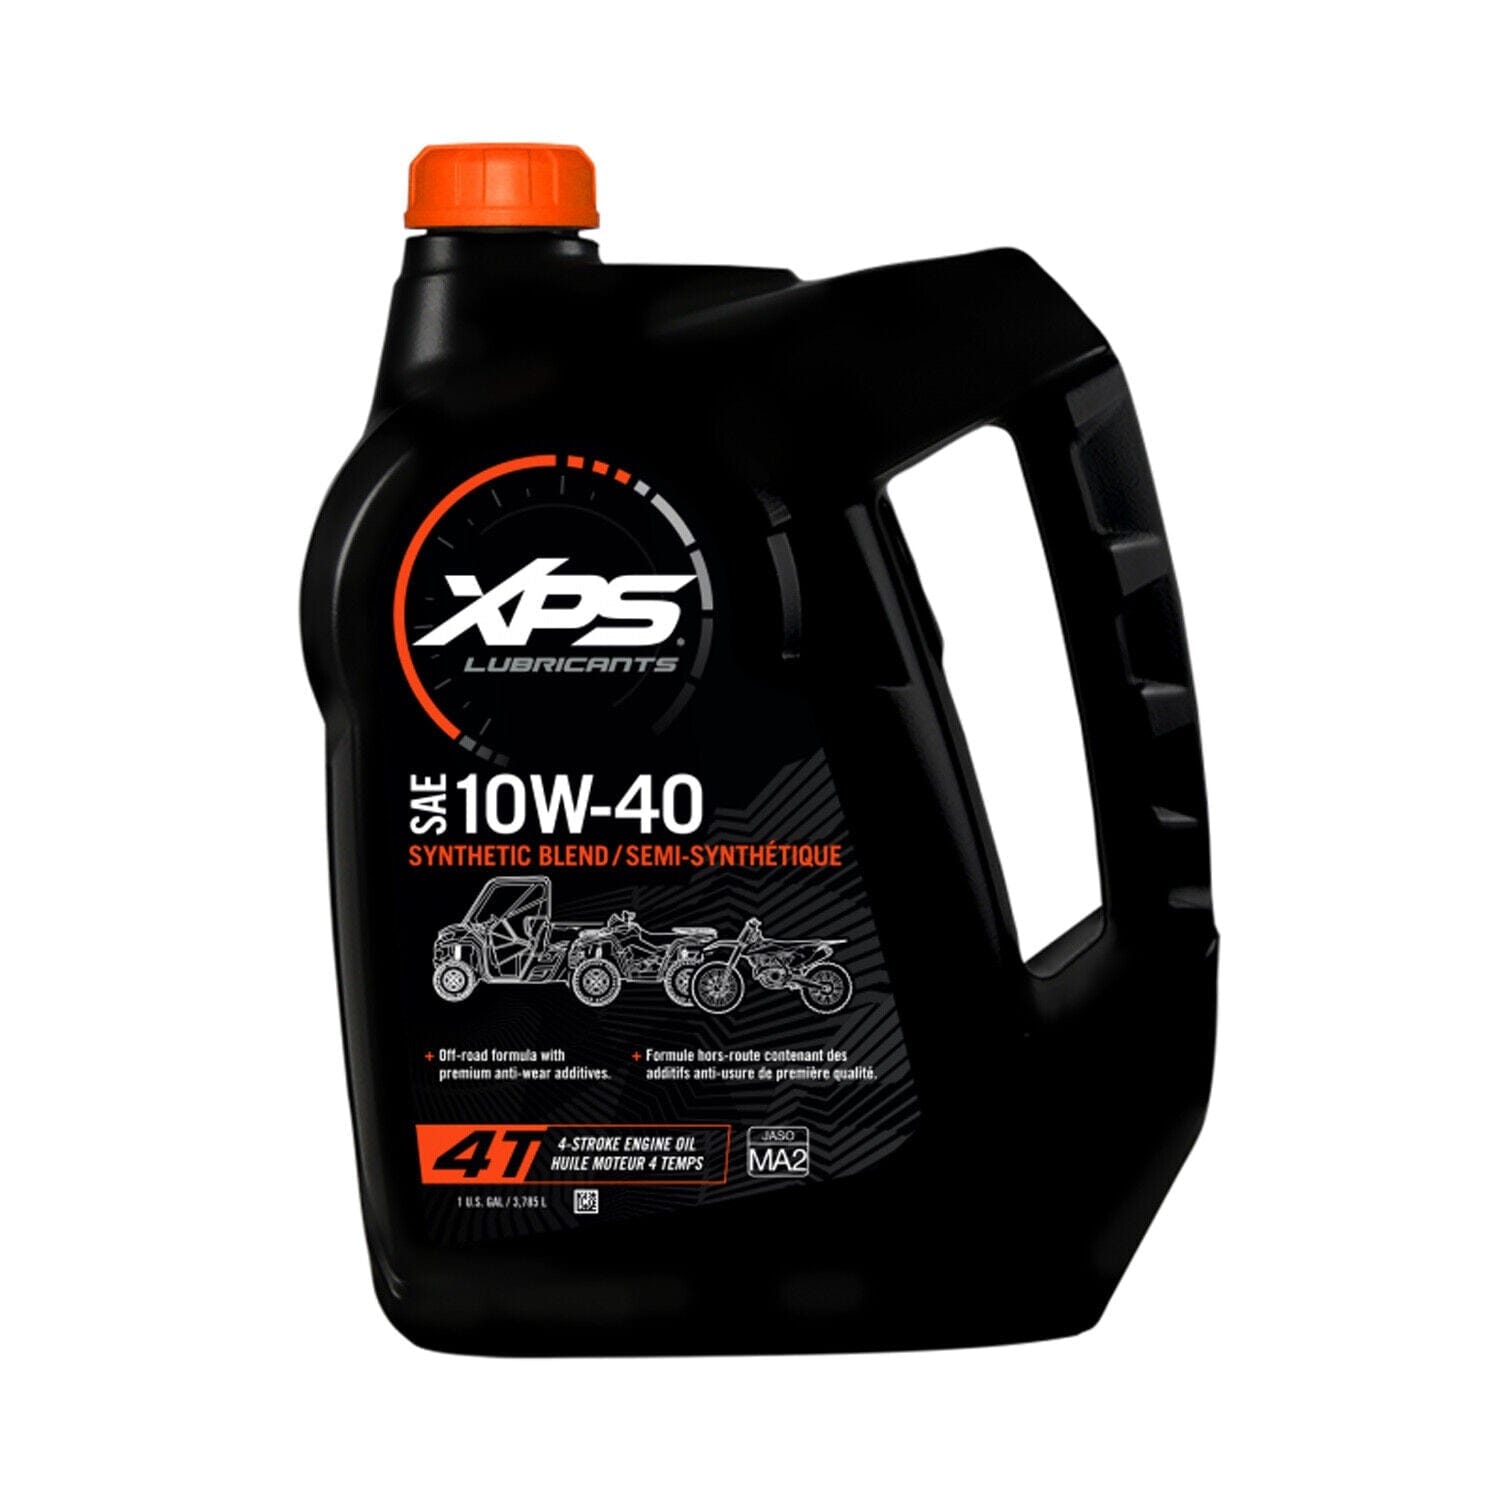 4T 10W-40 Synthetic Blend Oil - Factory Recreation